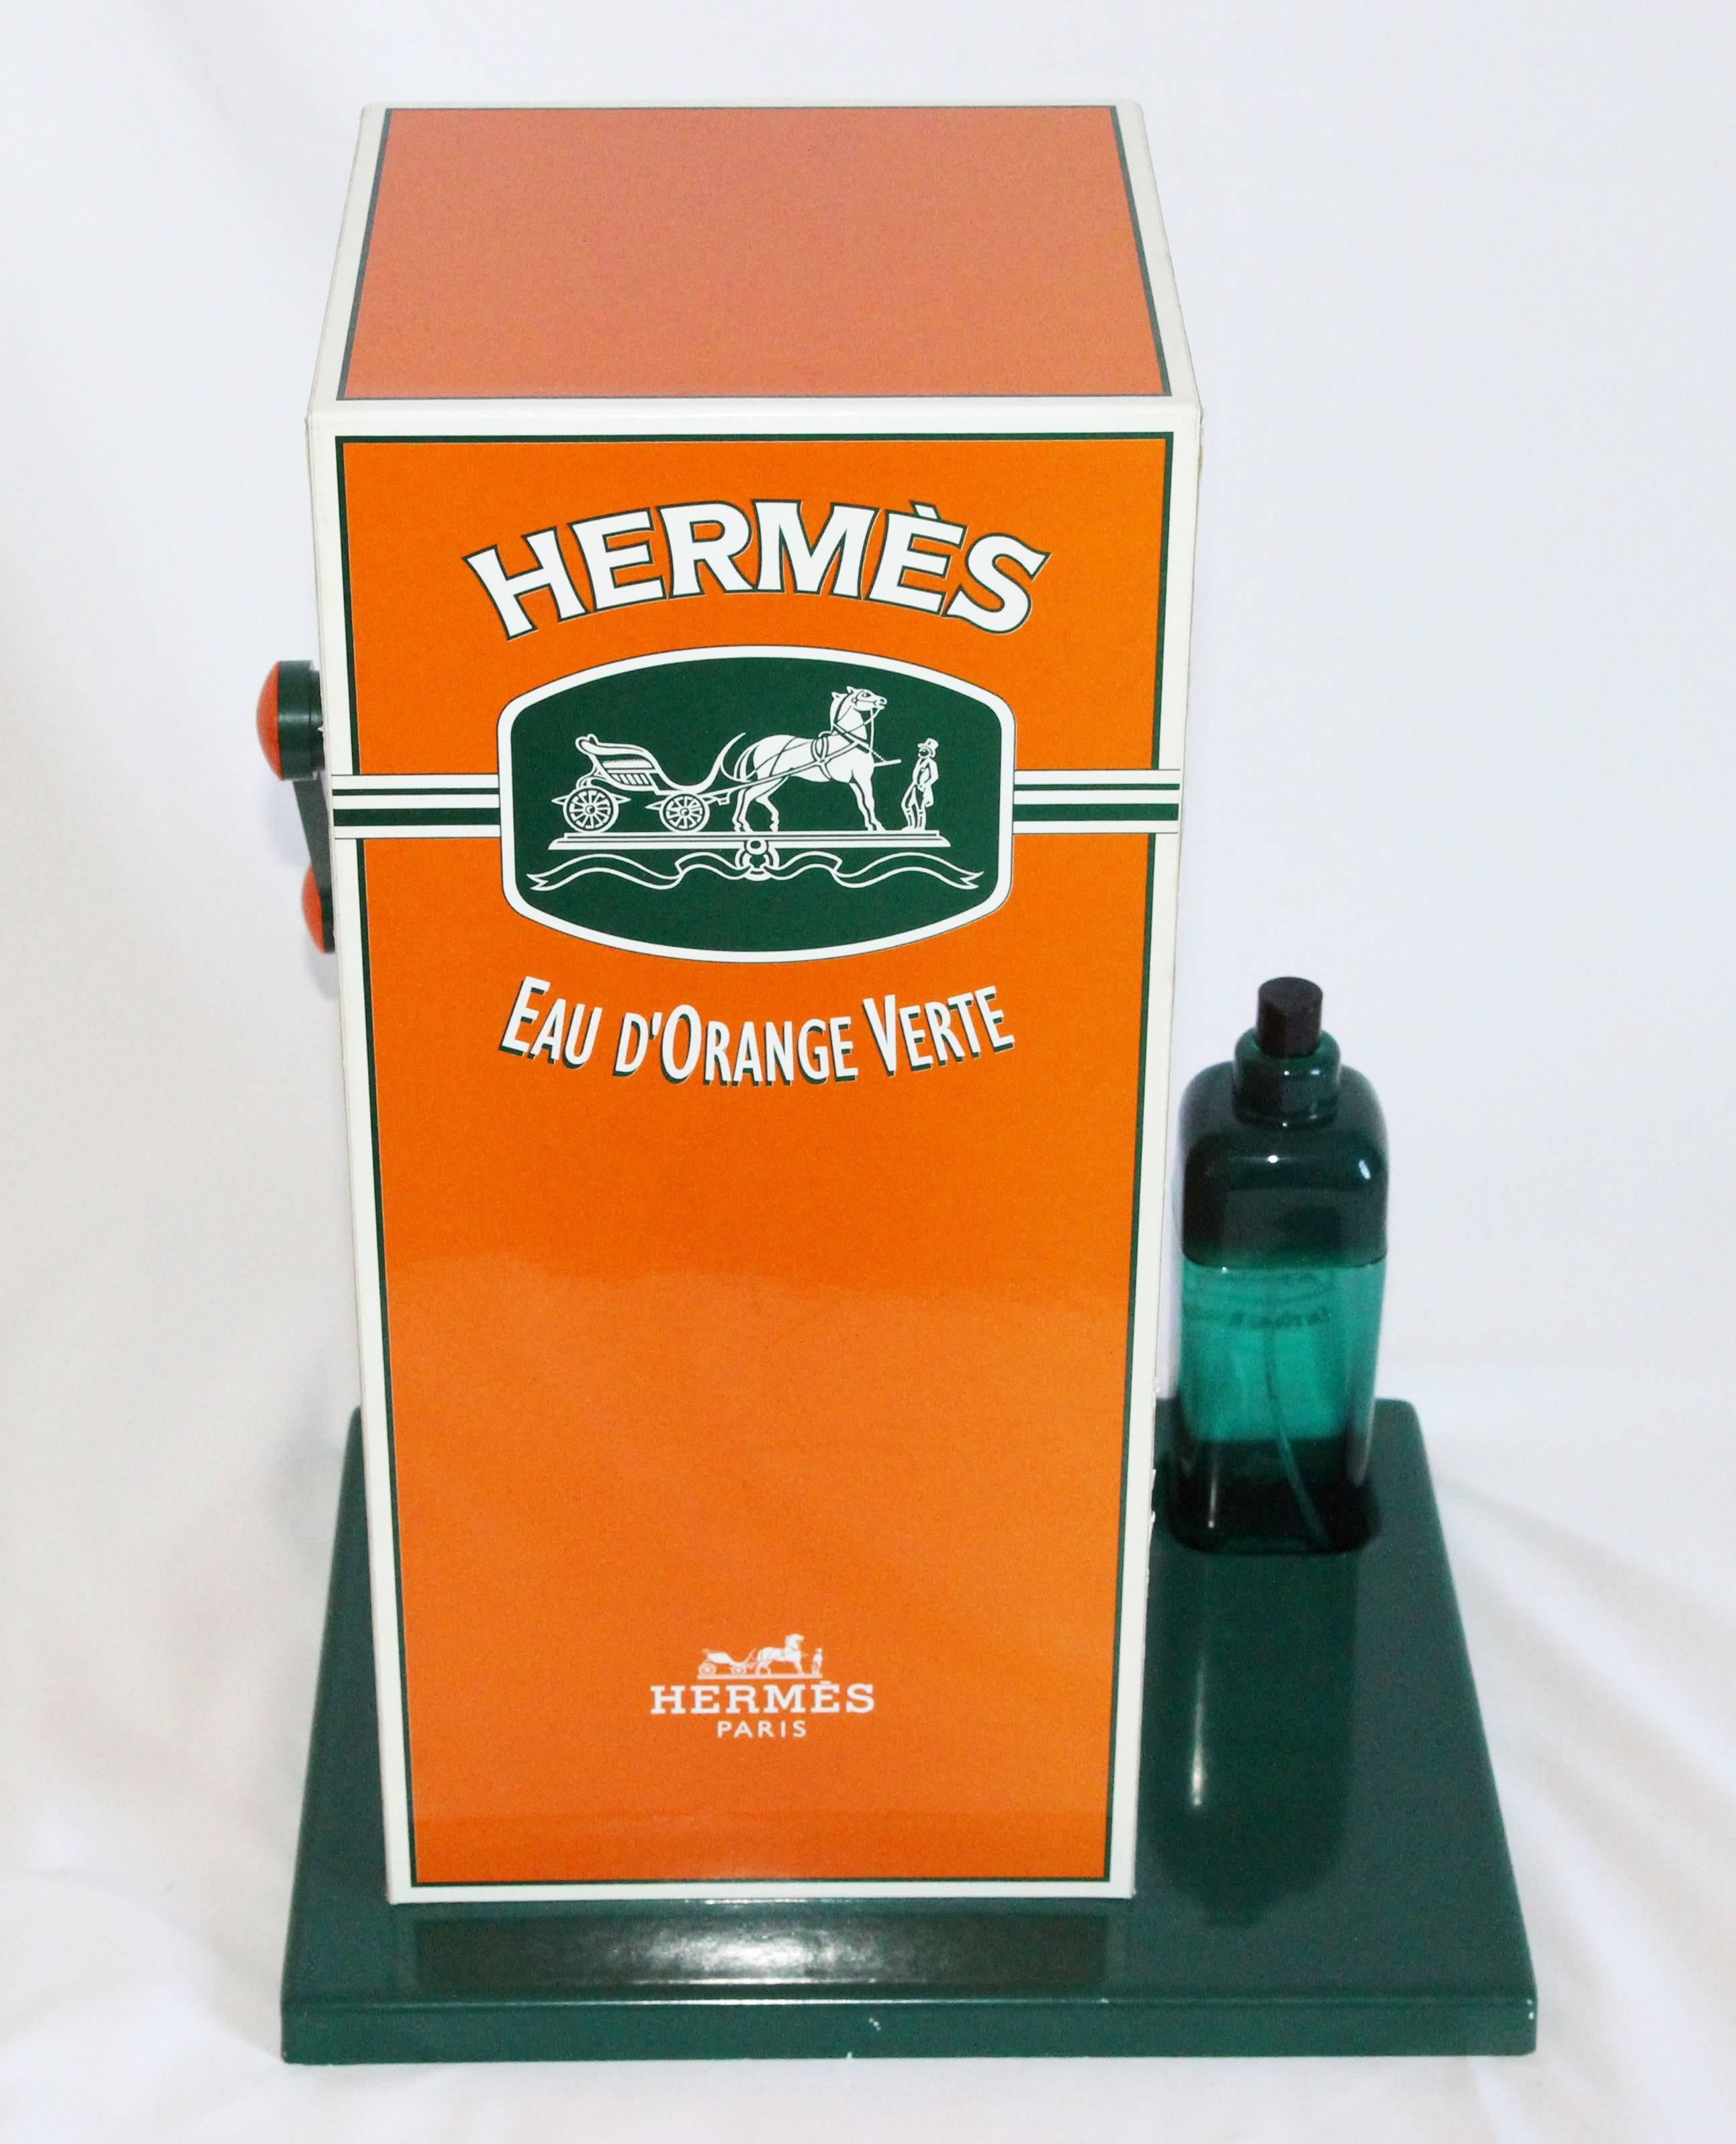 Incredible Hermes jackpot made for the launch of the perfume Eau d'orange verte in 1979. If you get three times 